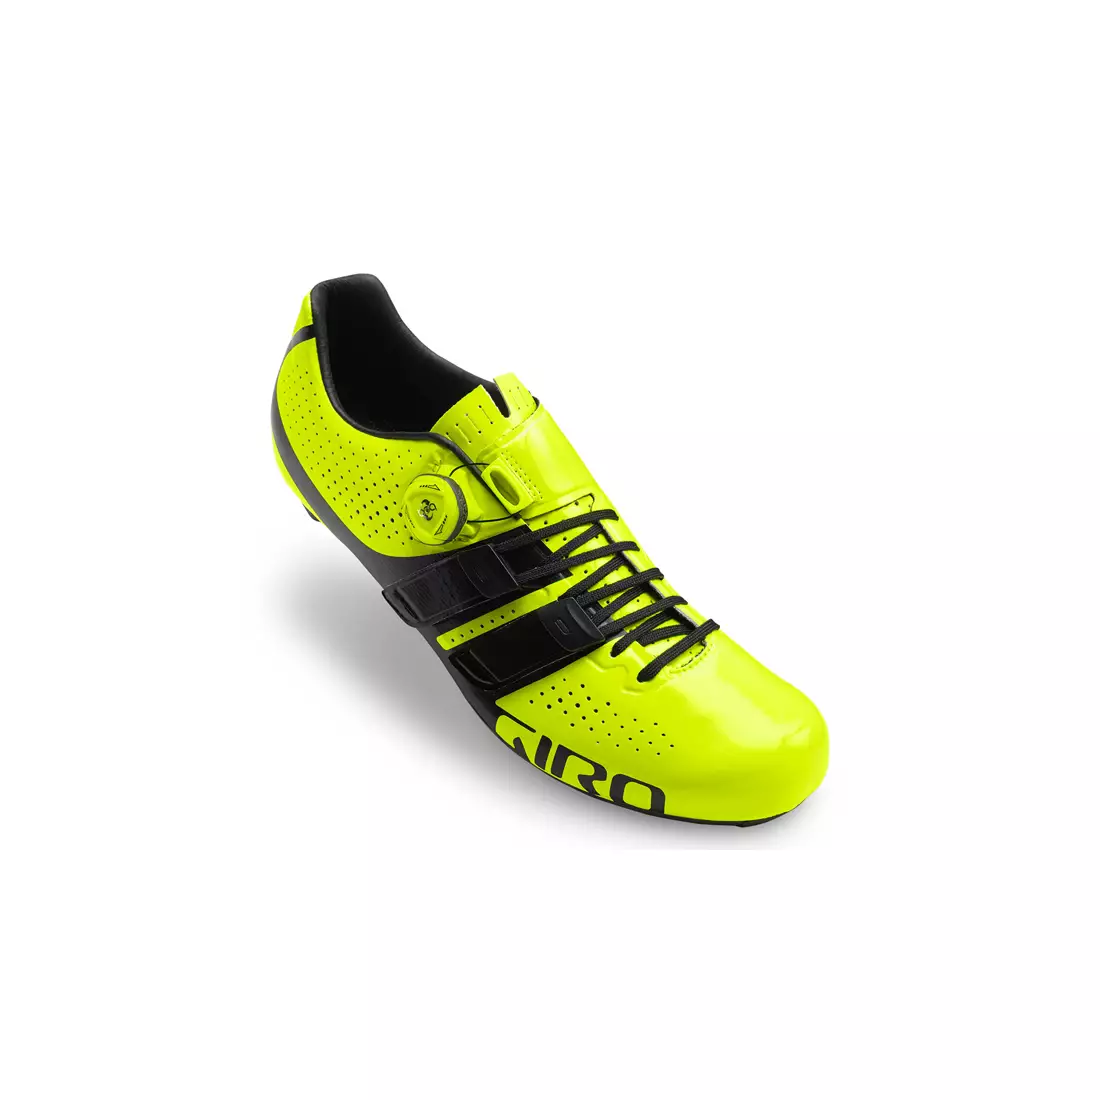 Men's bicycle boots  GIRO FACTOR TECHLACE highlight yellow black 